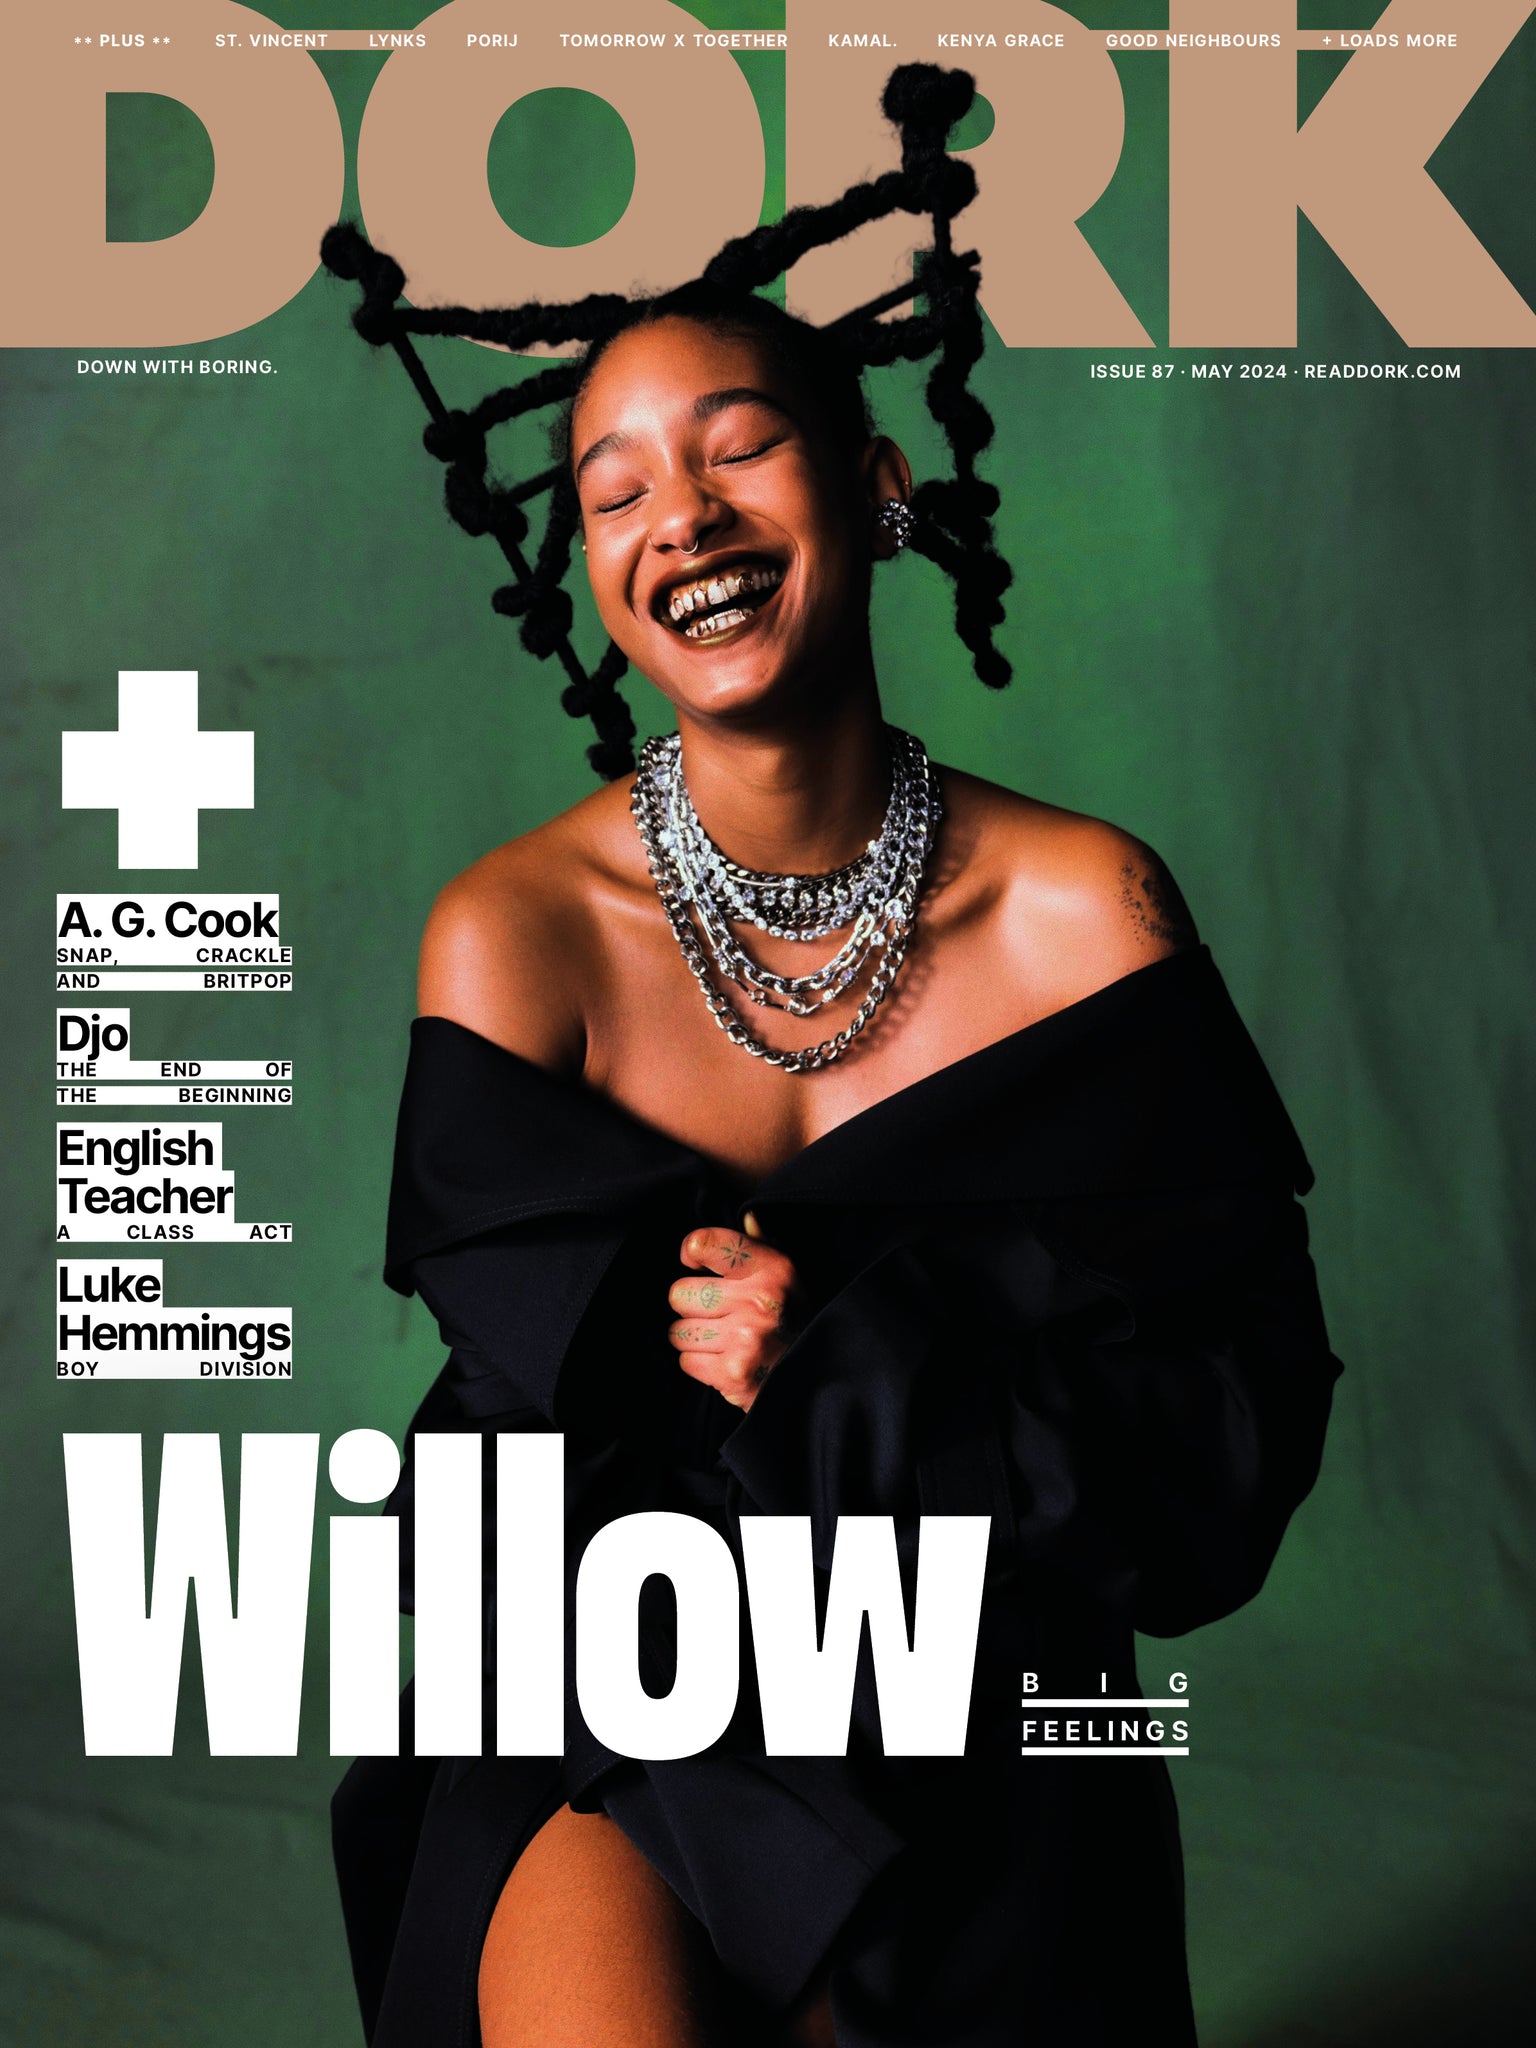 Dork, May 2024 (WILLOW cover)